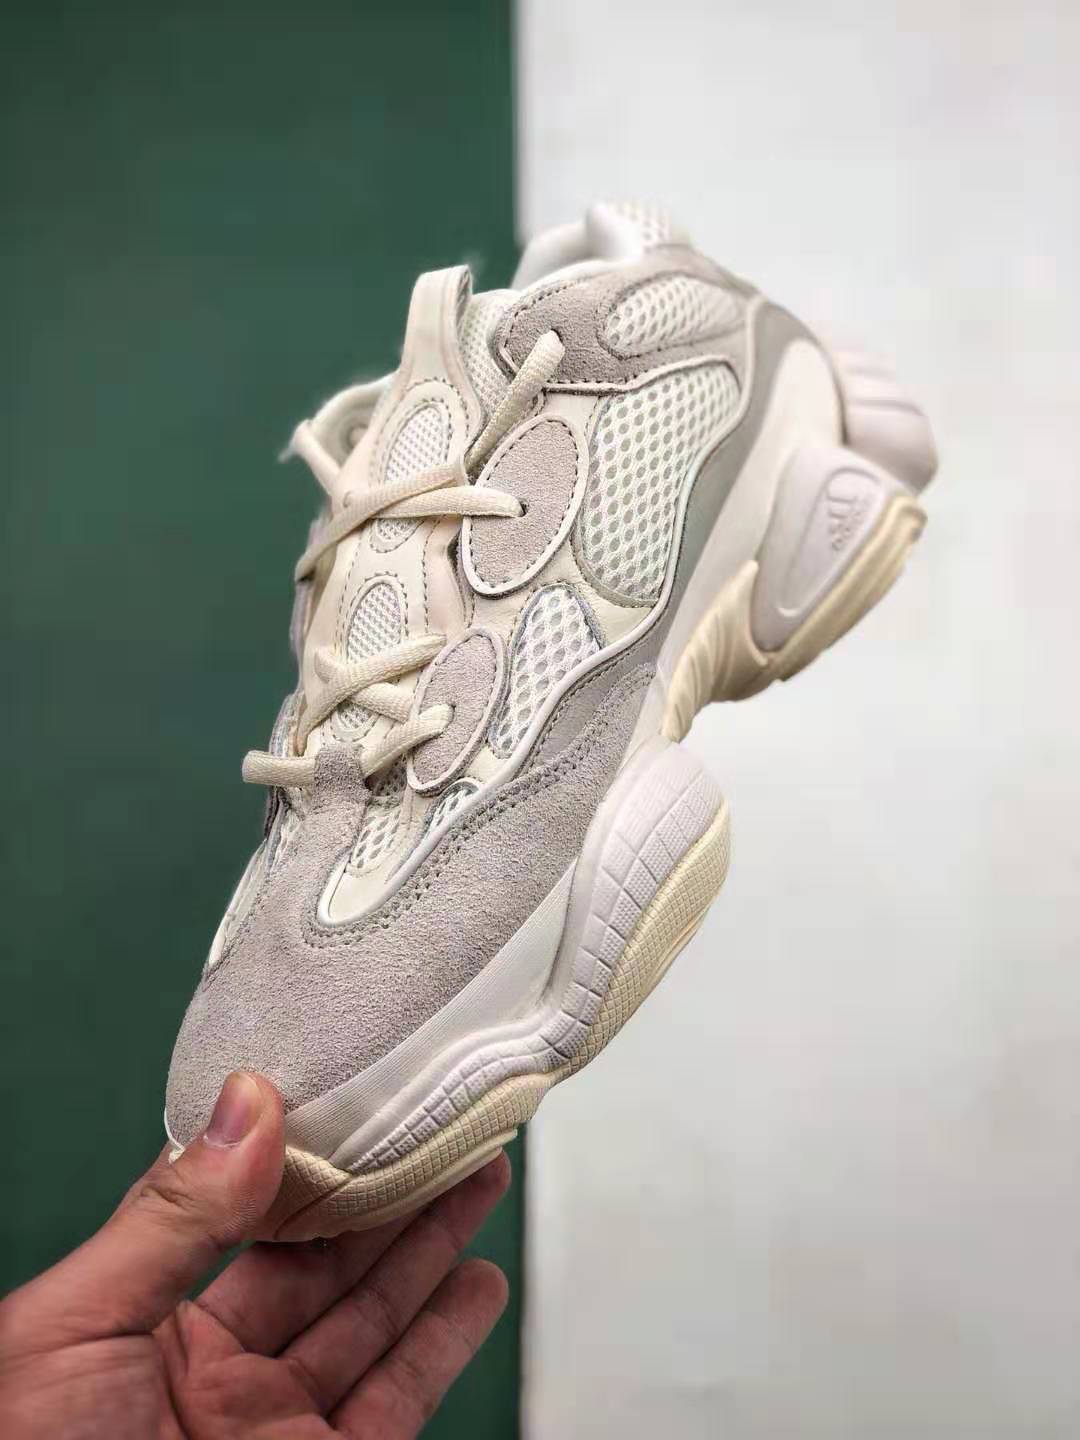 Adidas Yeezy 500 'Bone White' FV3573 - Shop the Latest Release Today!